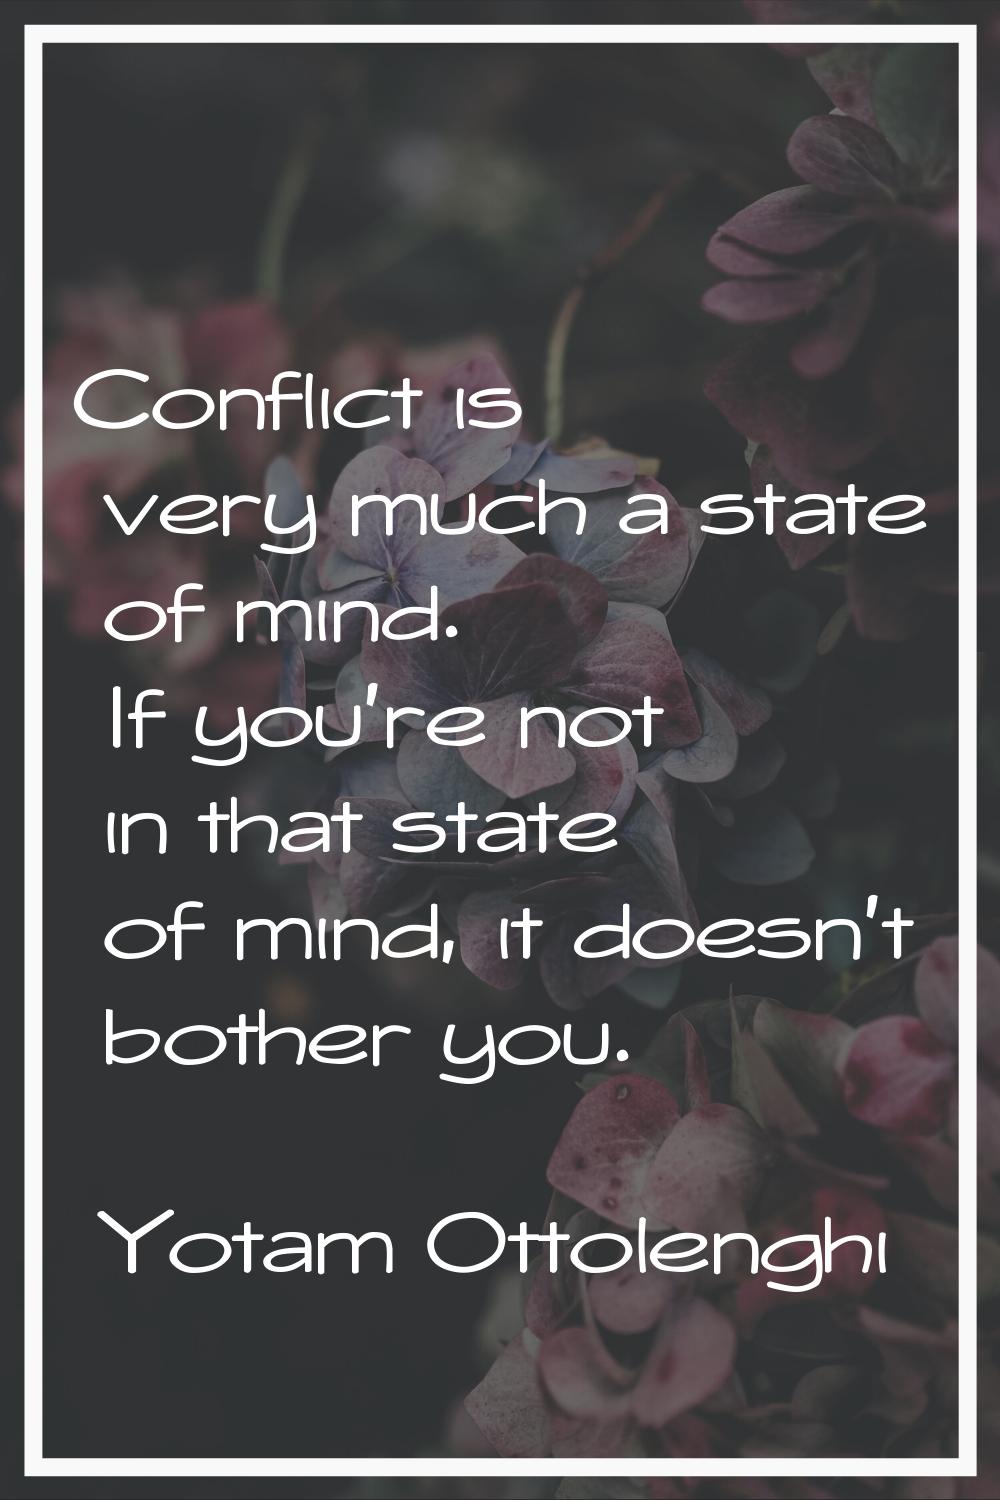 Conflict is very much a state of mind. If you're not in that state of mind, it doesn't bother you.